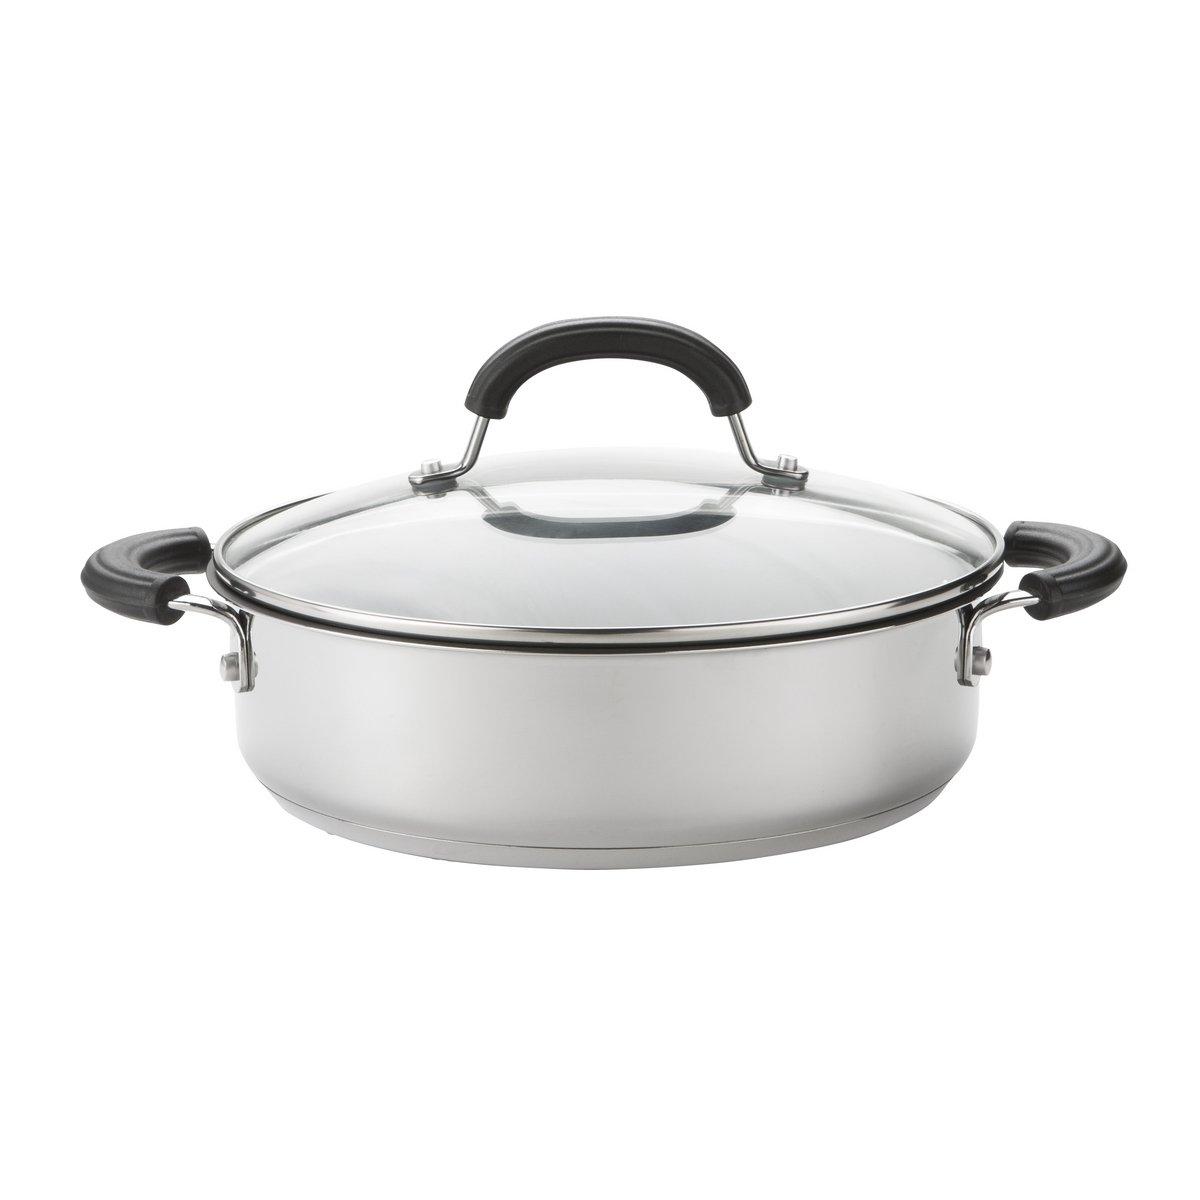 Black 'Total' Round Stainless Steel Non Stick Sauteuse - 30 cm